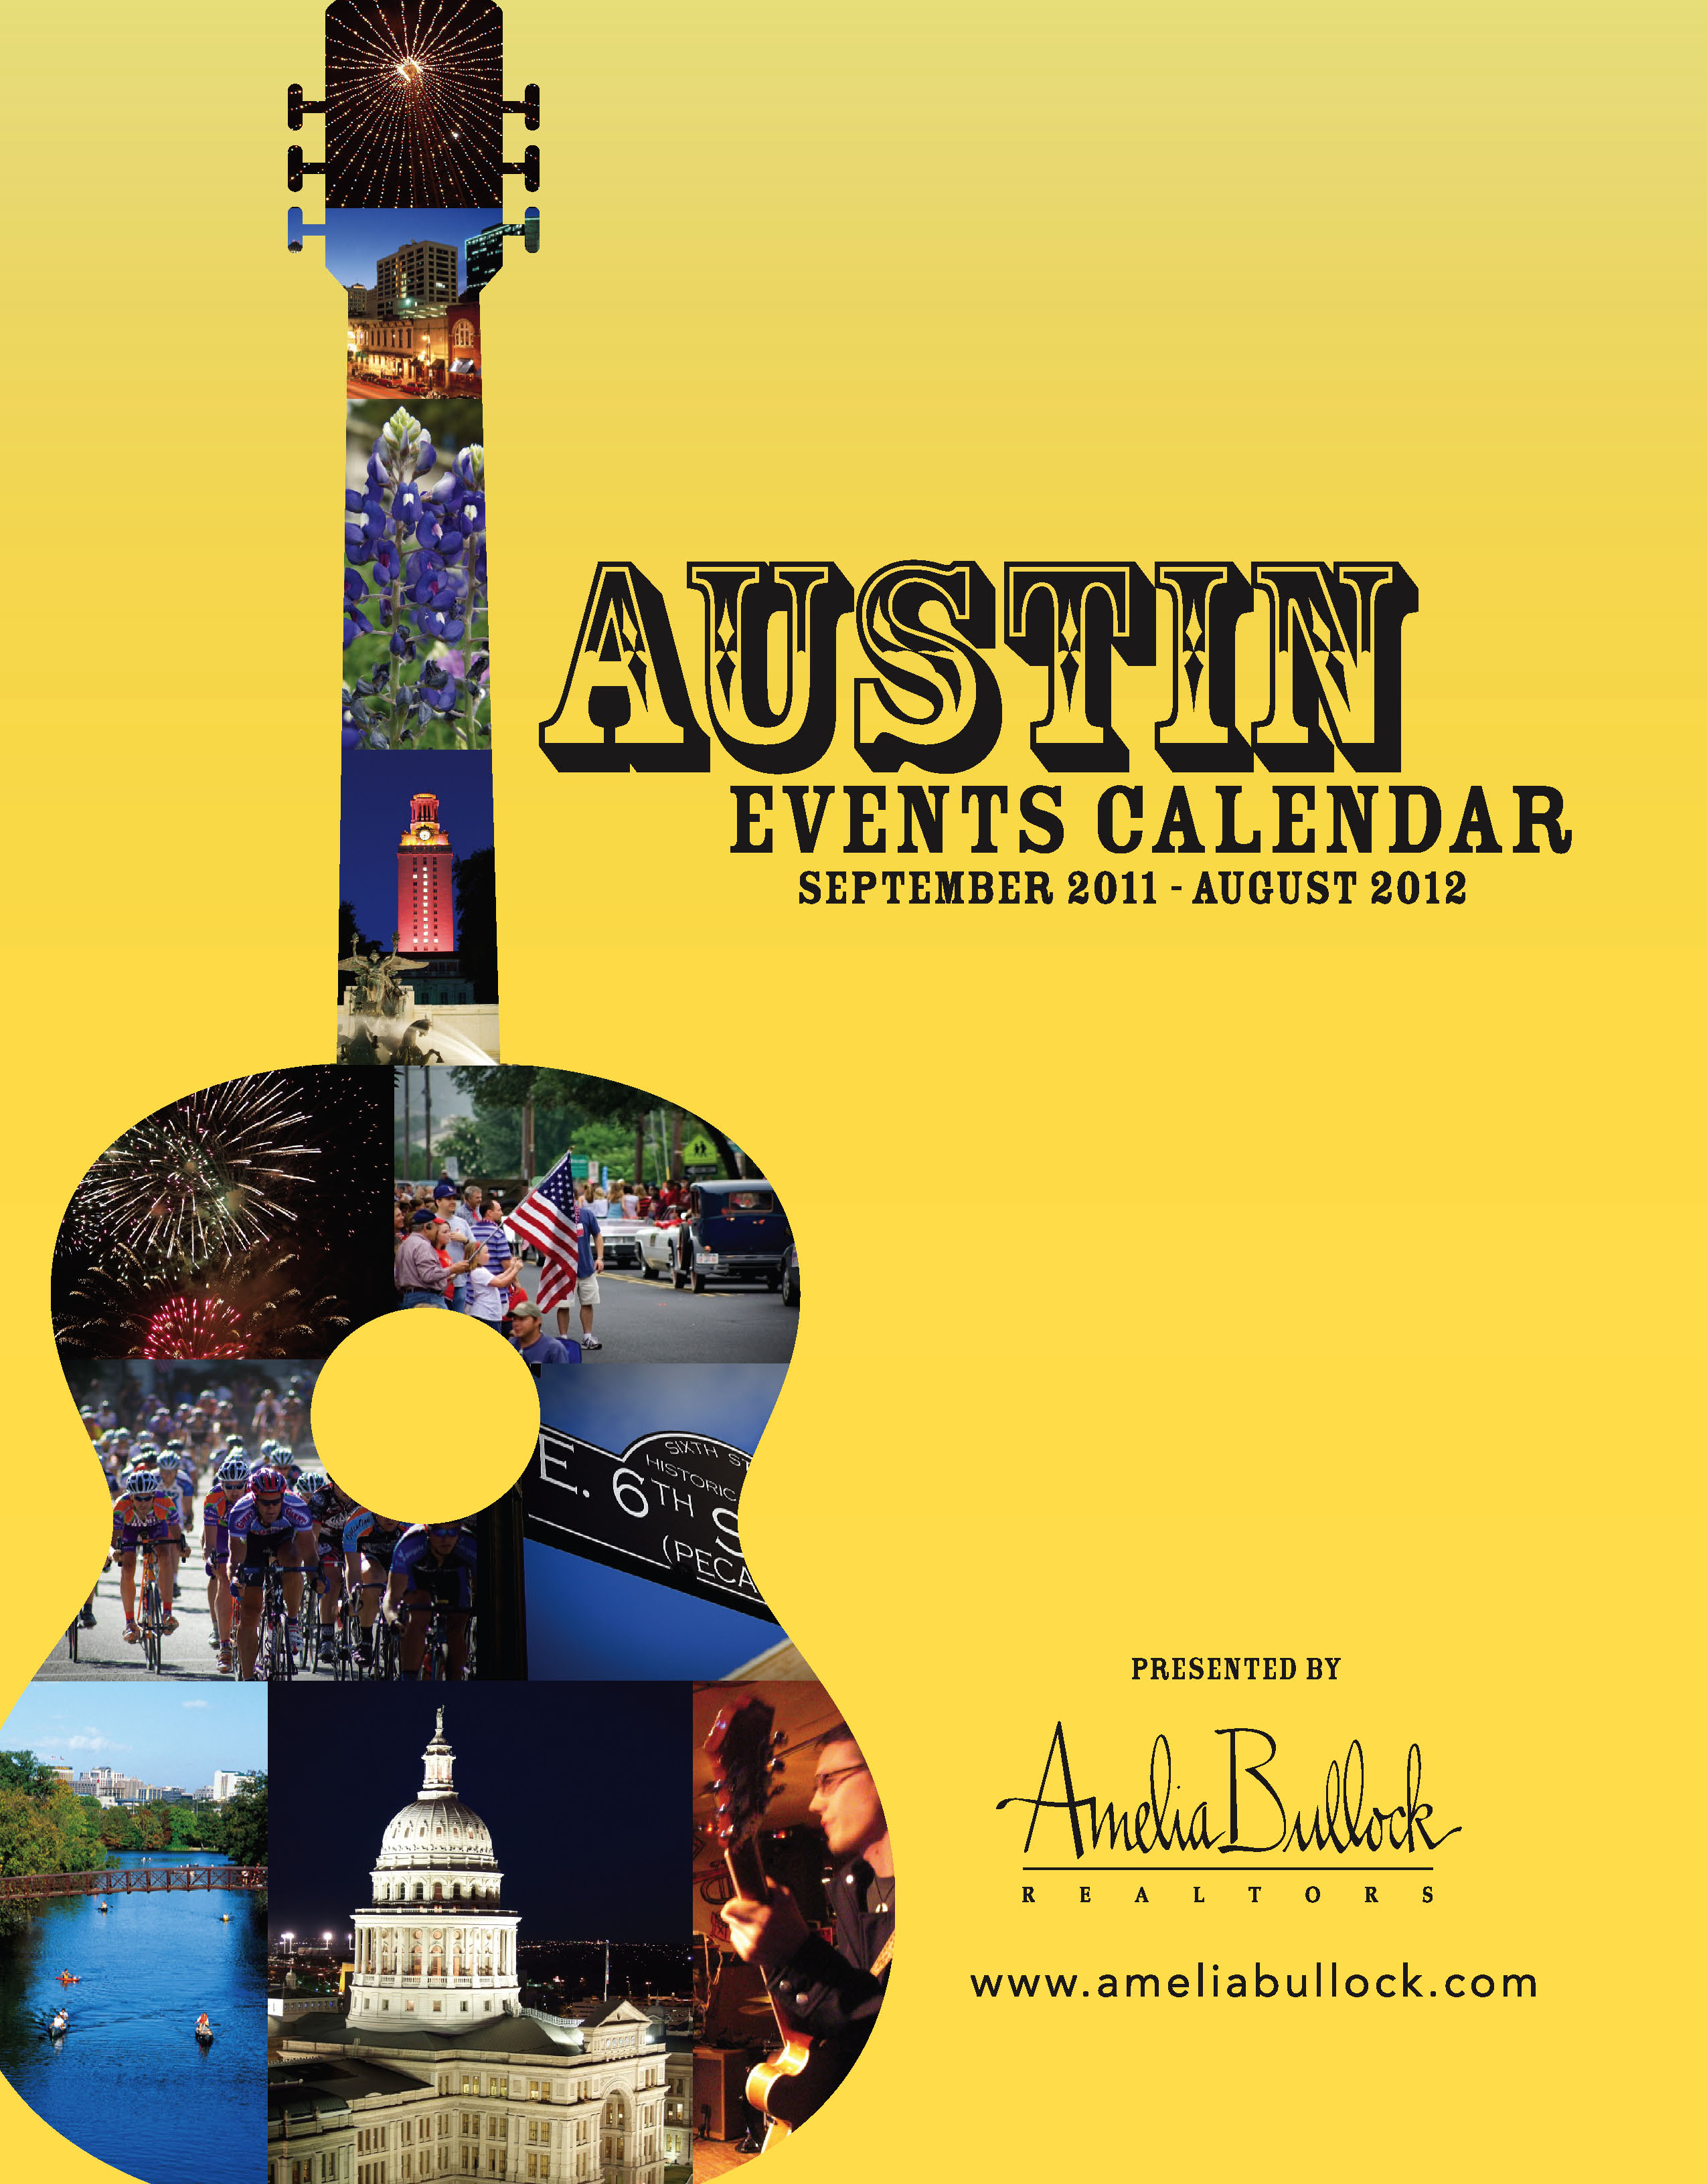 Austin Event Calendar produced by Amelia Bullock Realtors to support community events and charitable foundations.